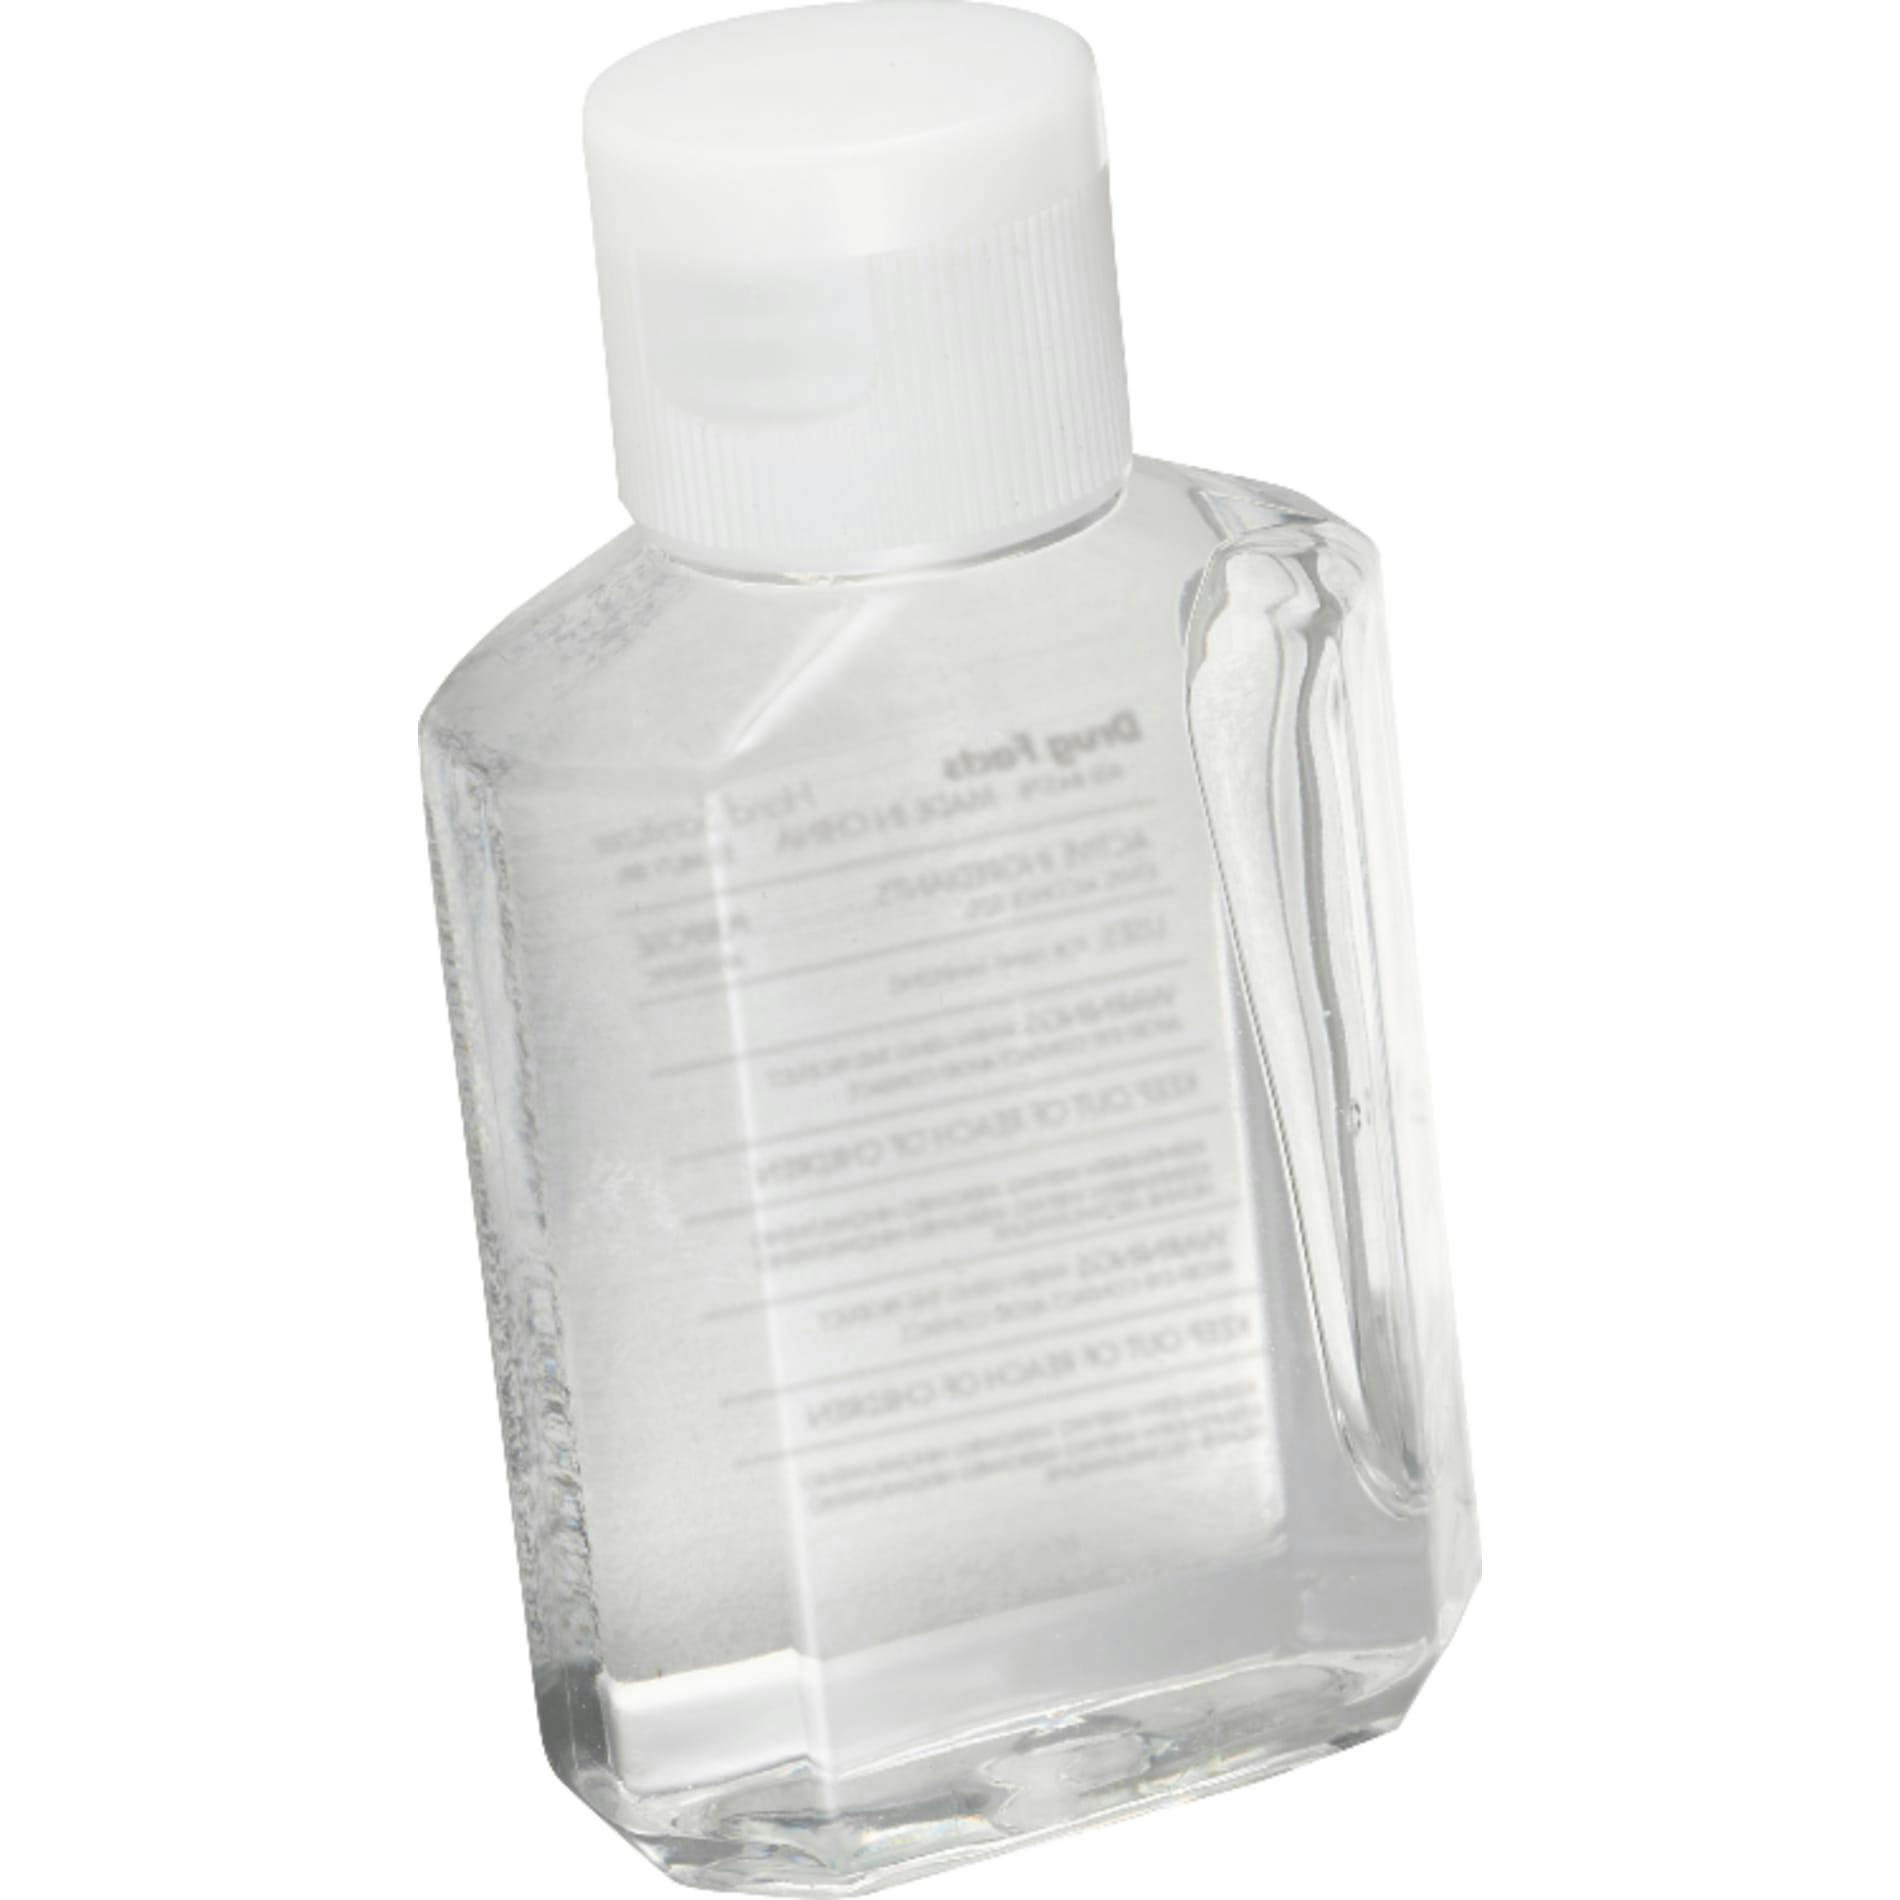 2oz Squirt Hand Sanitizer - additional Image 1